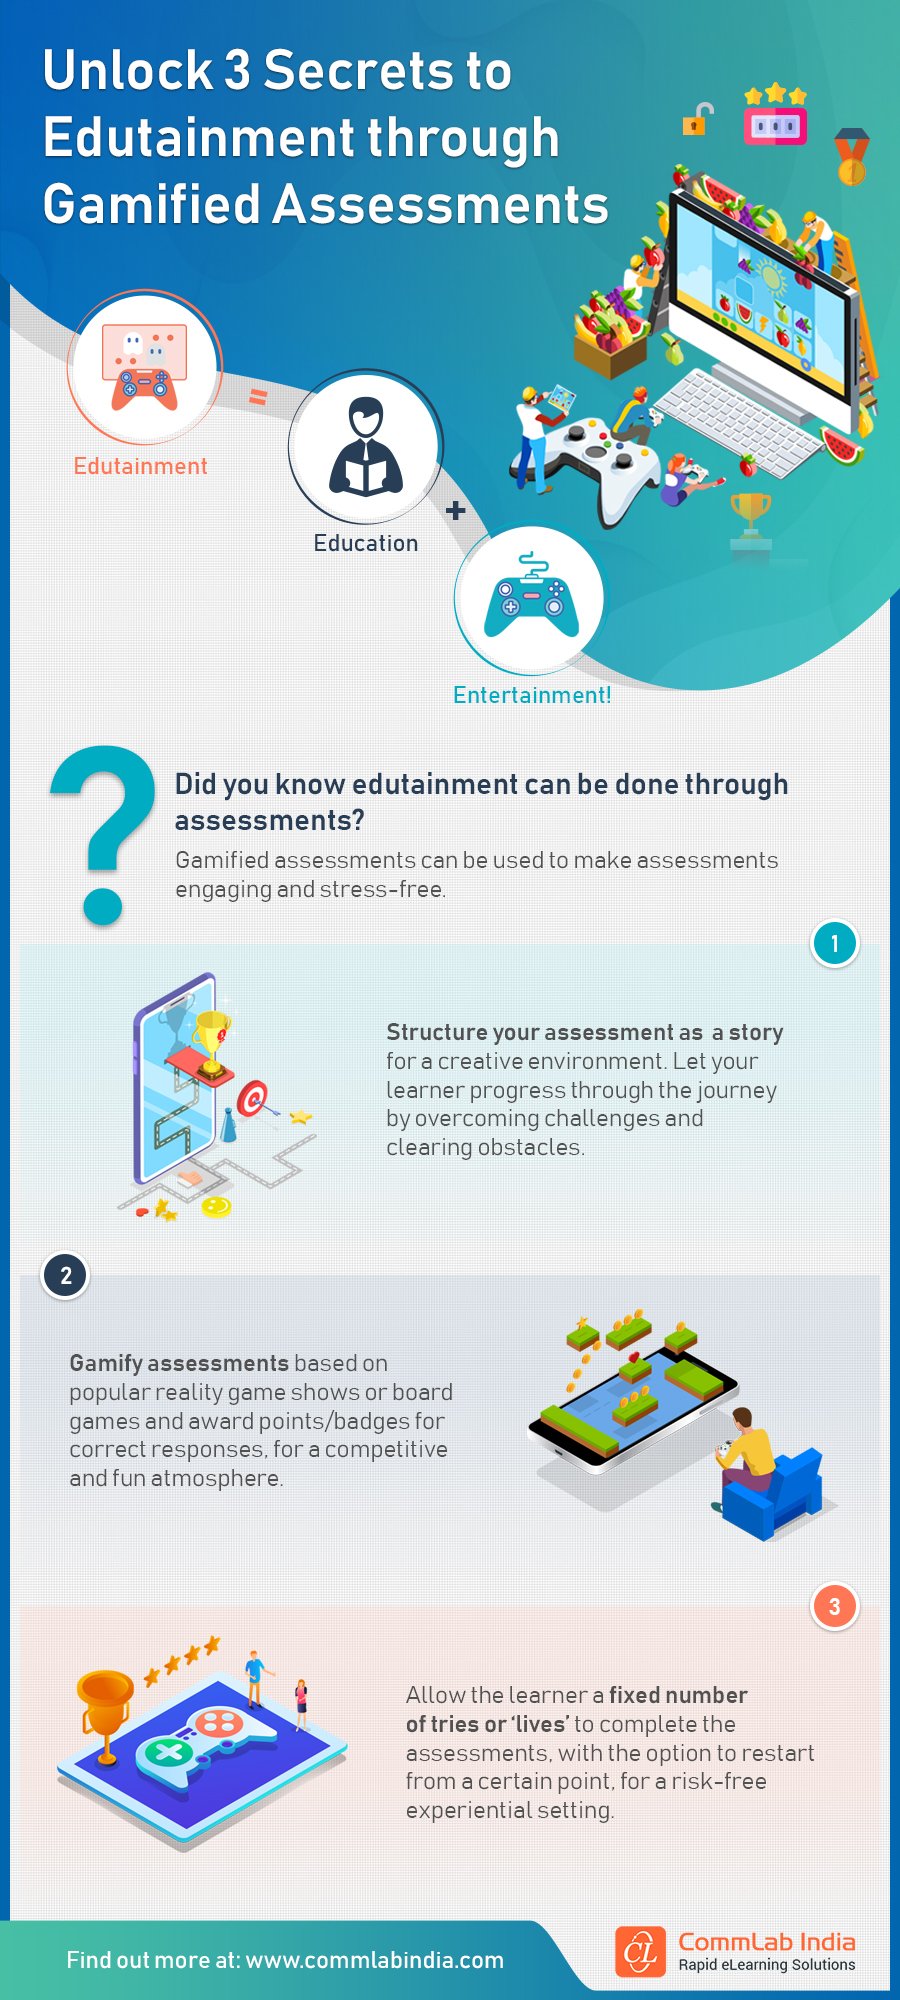 Unlock 3 Secrets to Edutainment through Gamified Assessments [Infographic]